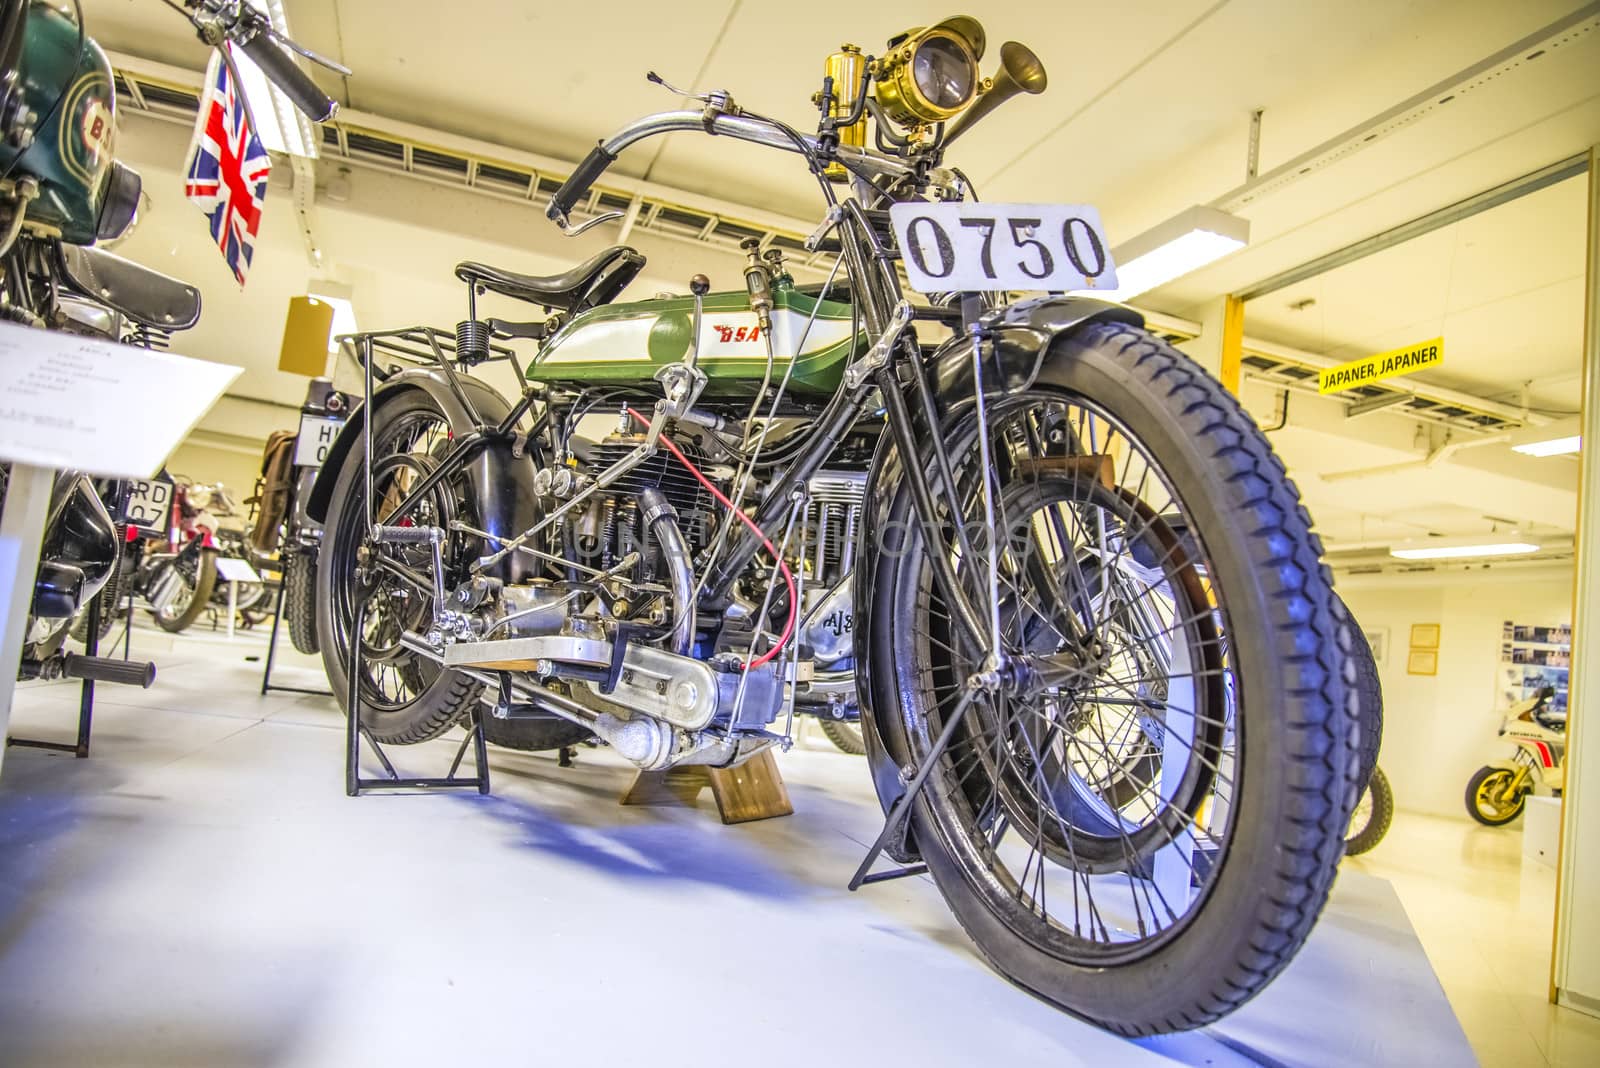 old motorcycle, 1921 bsa england by steirus